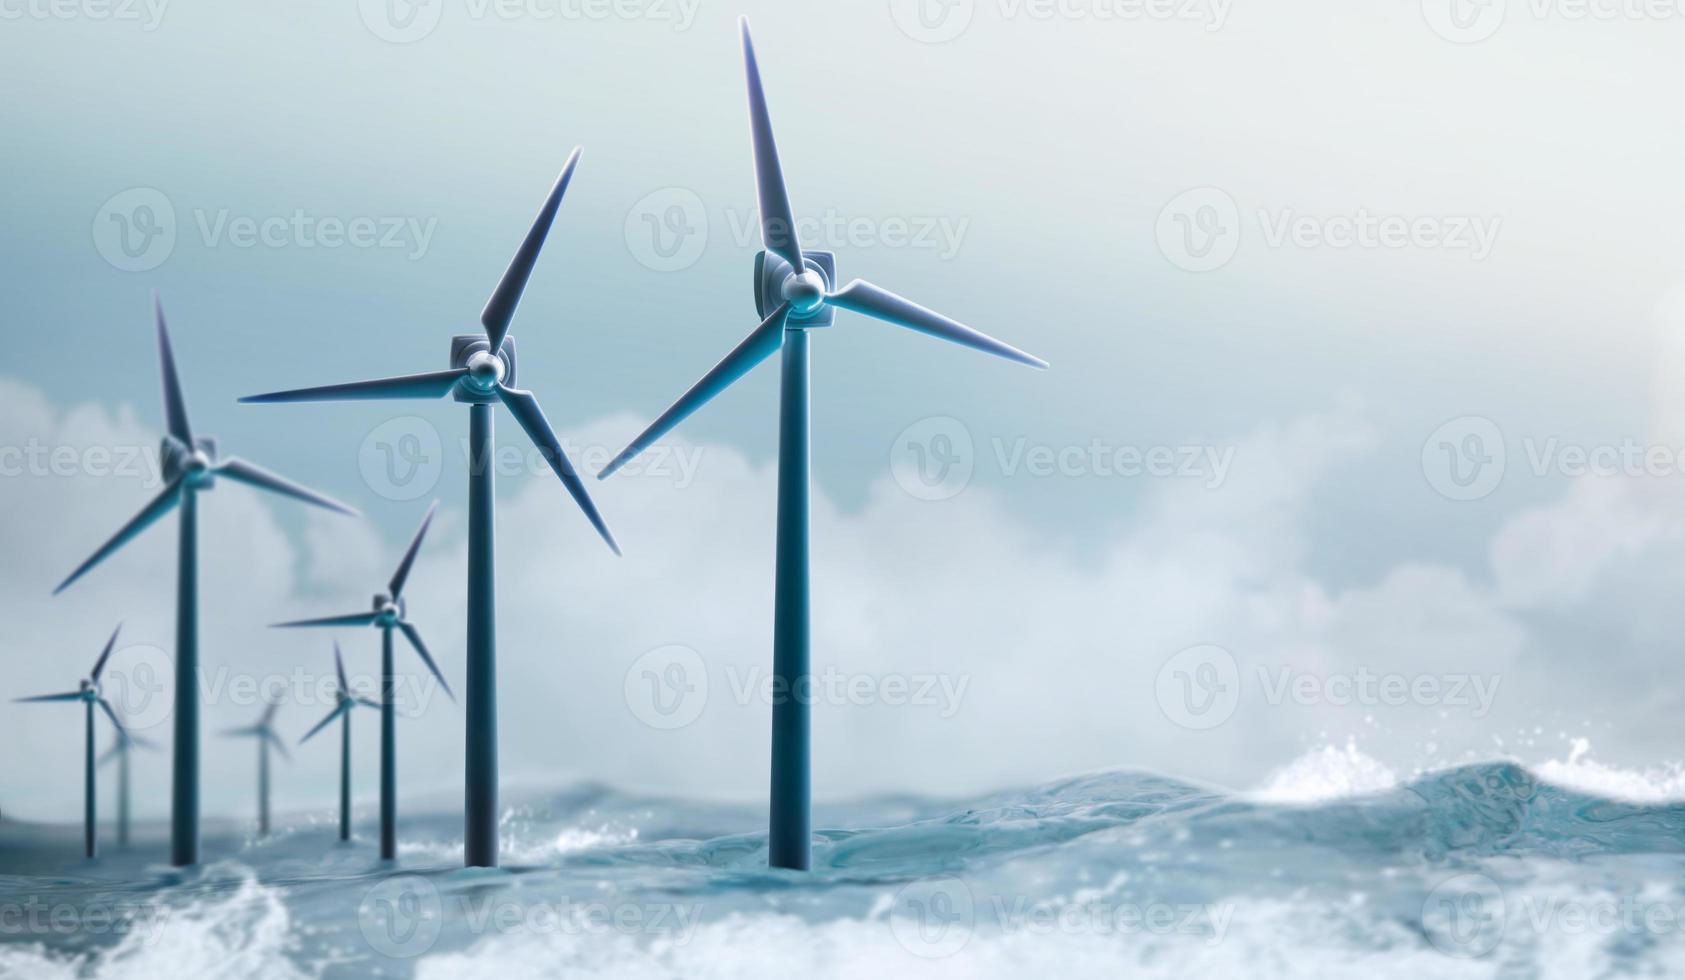 Renewable Energy Concepts. Wind Power stand in the Sea. Wind Generated Water Electrolysis to produce Hydrogen. Carbon Neutral and Emission ,ESG for Clean Energy. Sustainable, Environmental Care photo